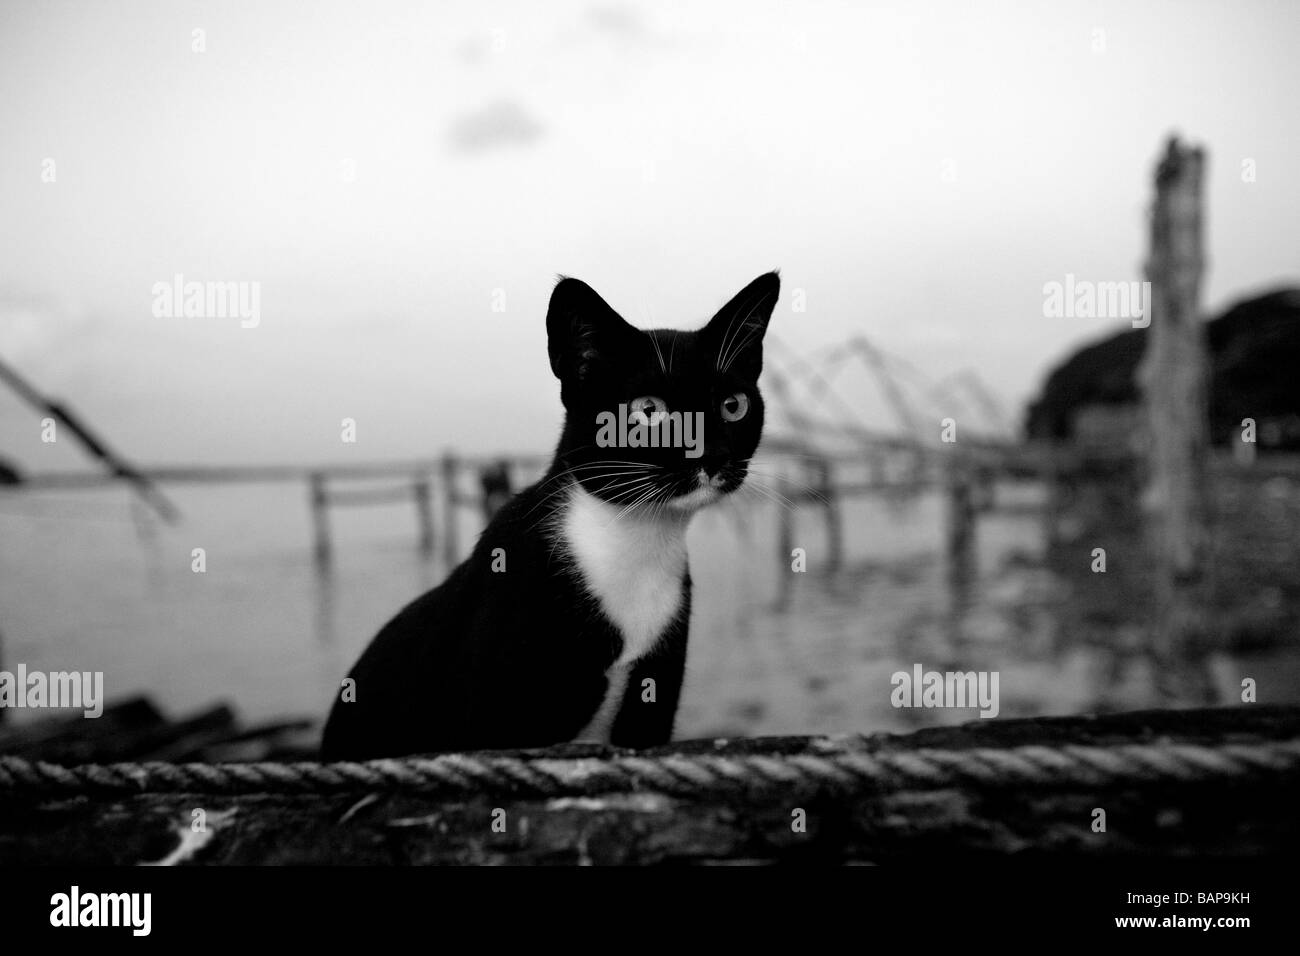 Kitten sits by the ropes of a Chinese fishing net in Fort Cochin, Kochi, Kerala, South India Stock Photo